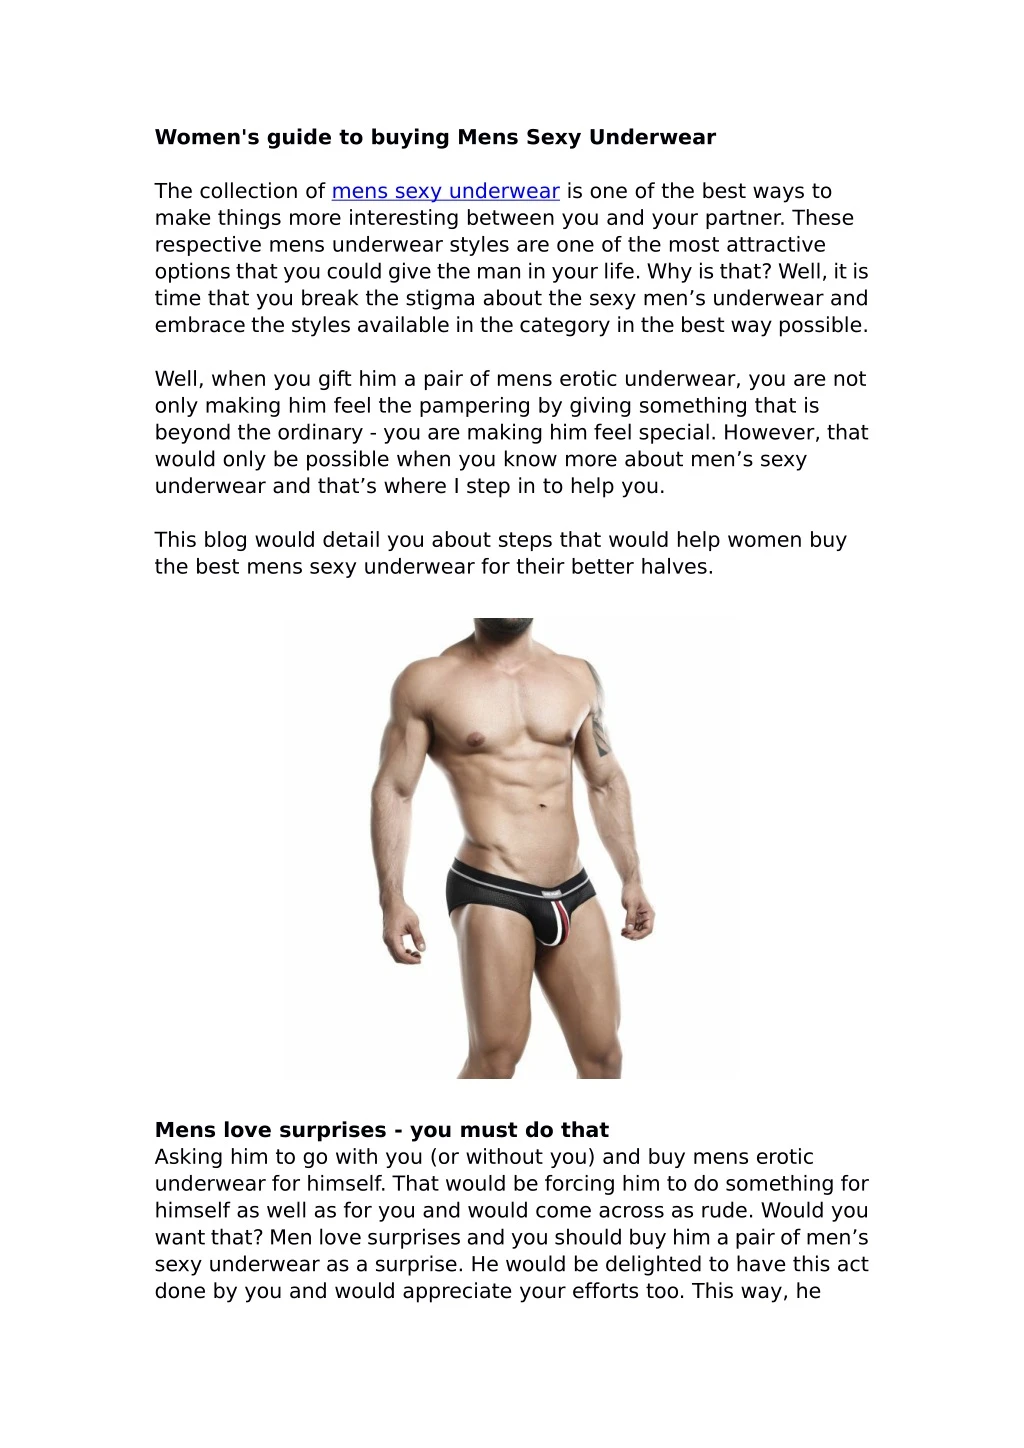 women s guide to buying mens sexy underwear n.